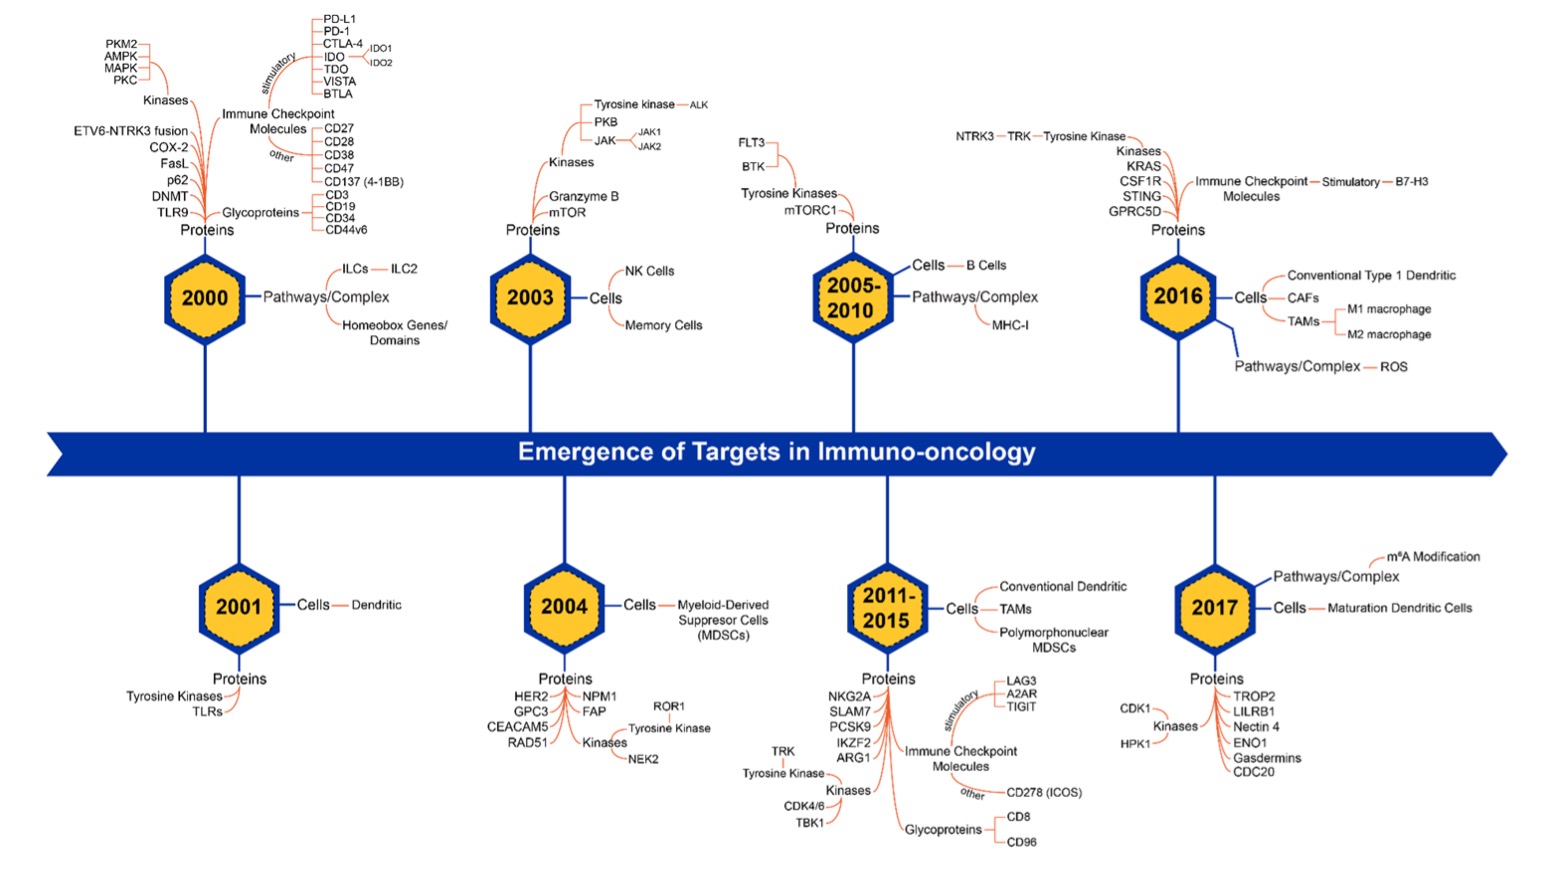 Timeline of emerging targets in immuno-oncology